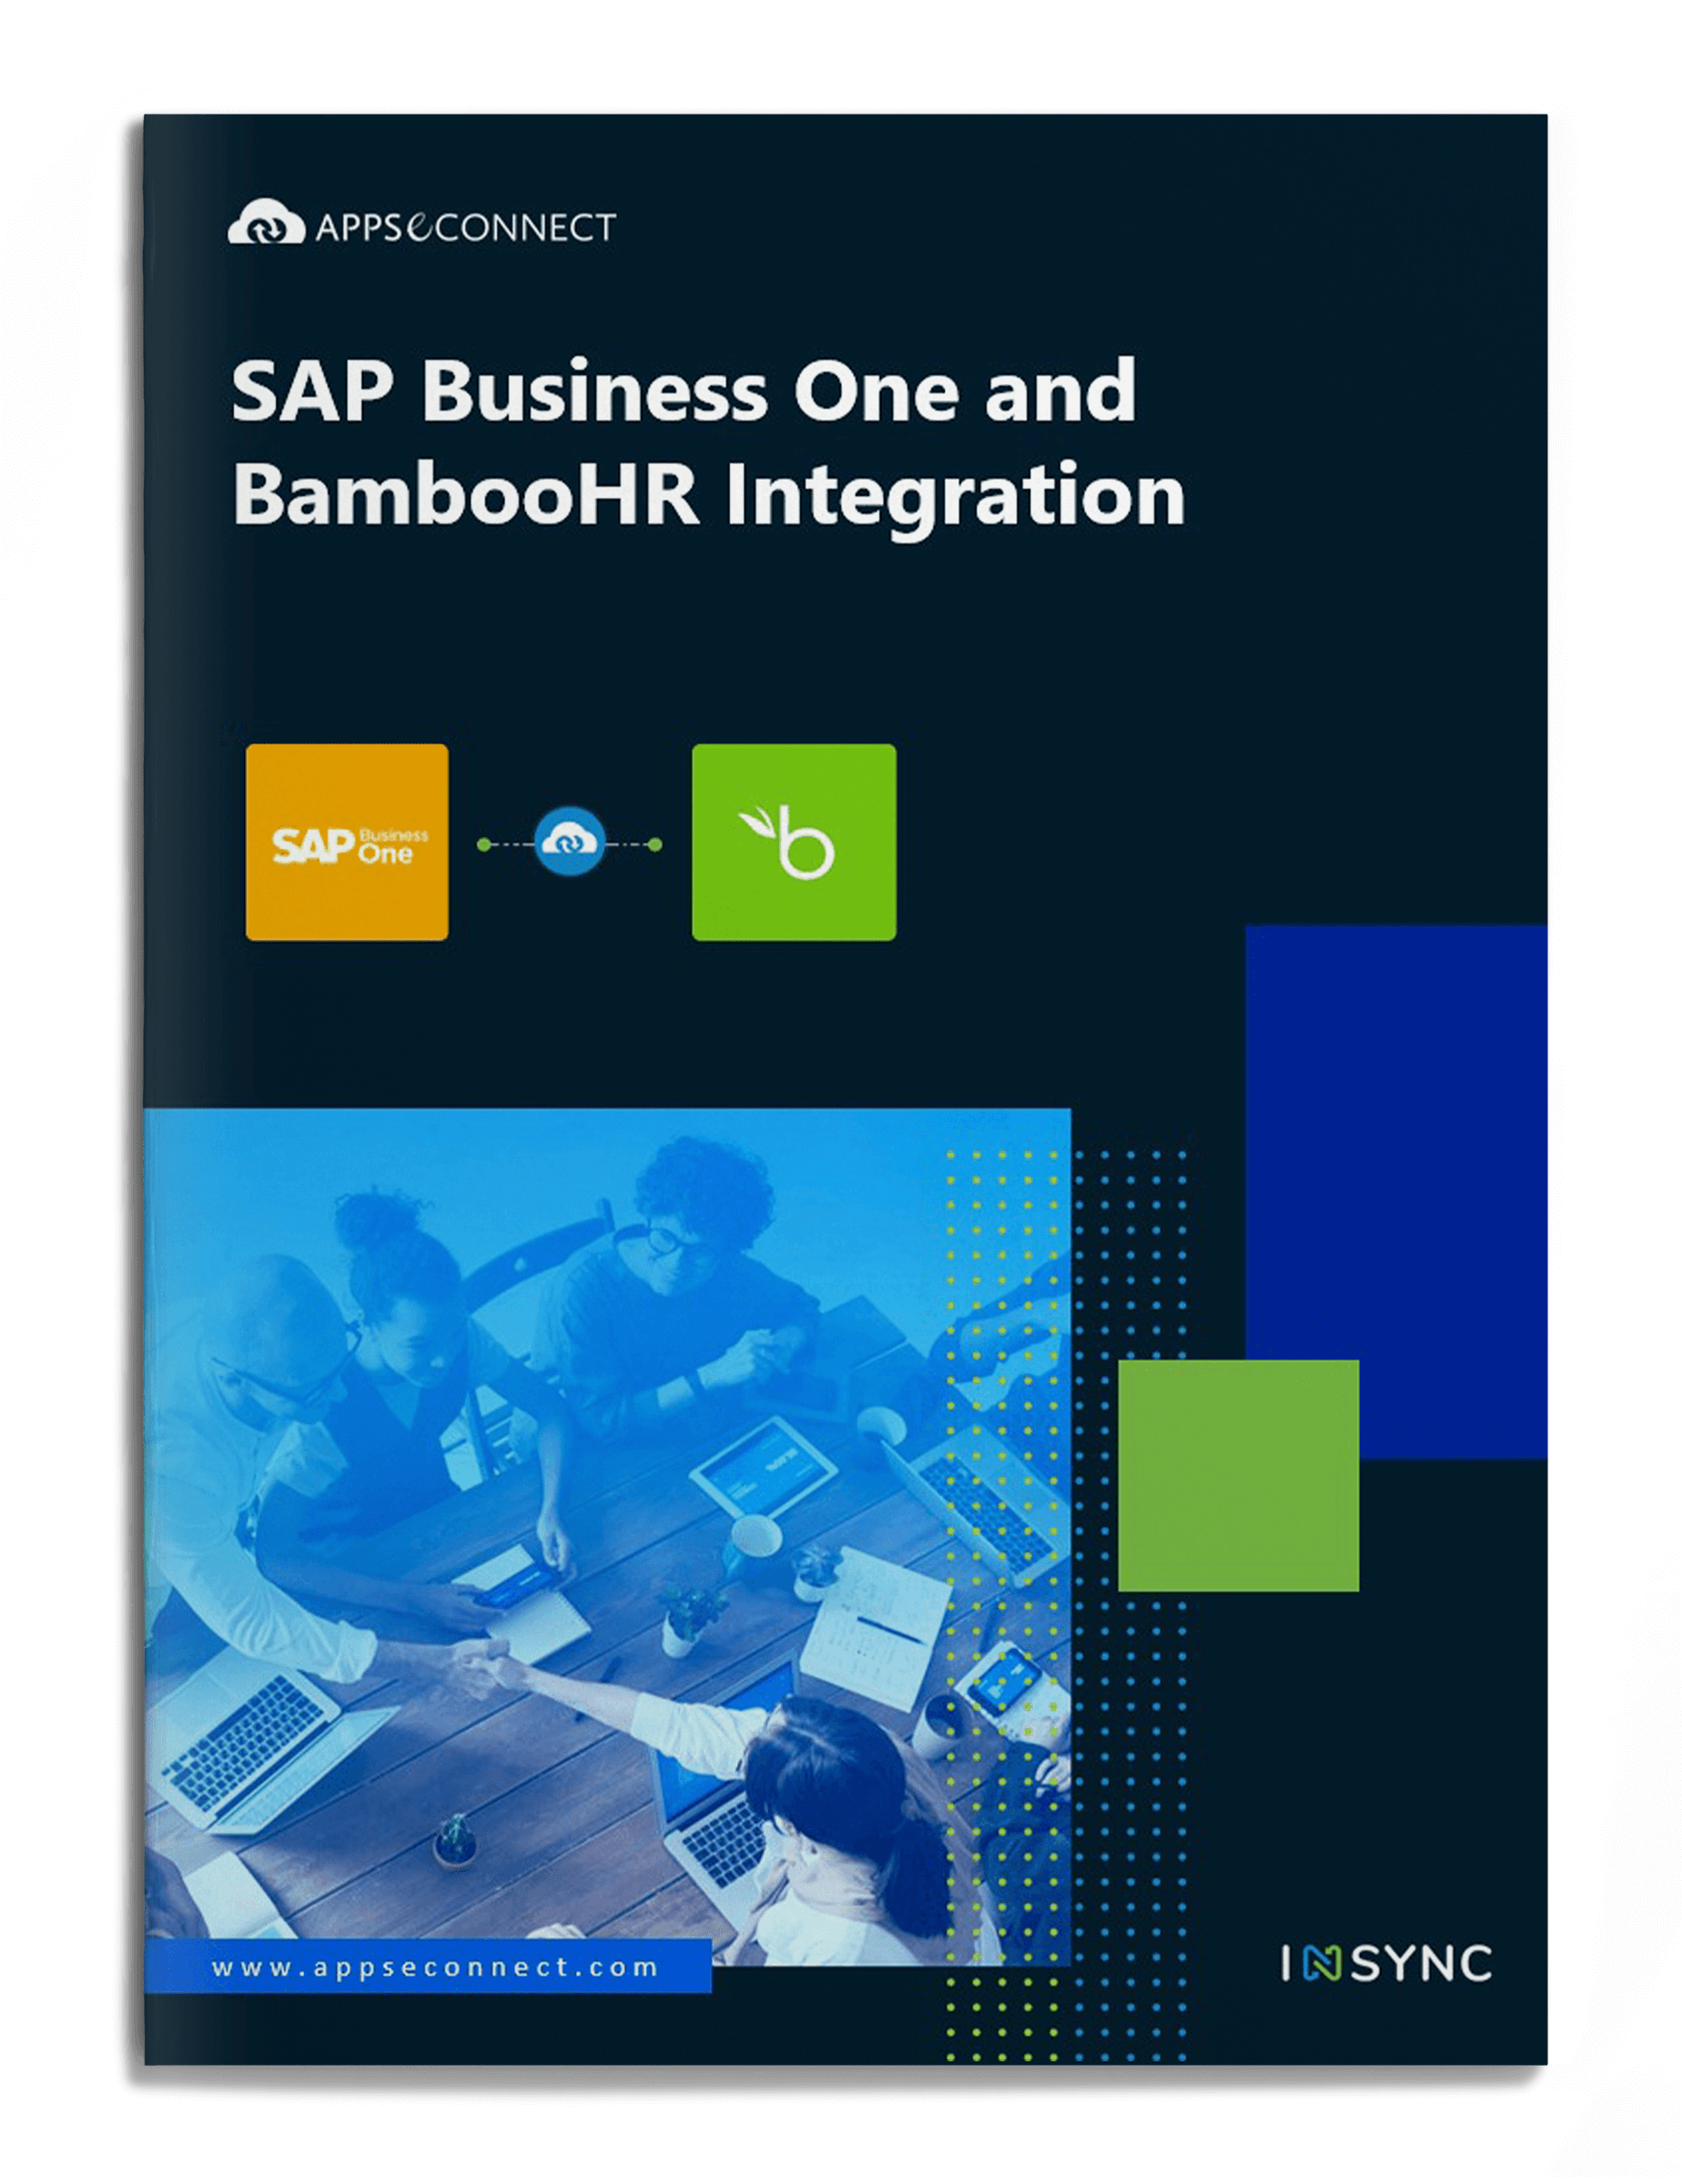 sap-business-one-bamboohr-integration-brochure-cover